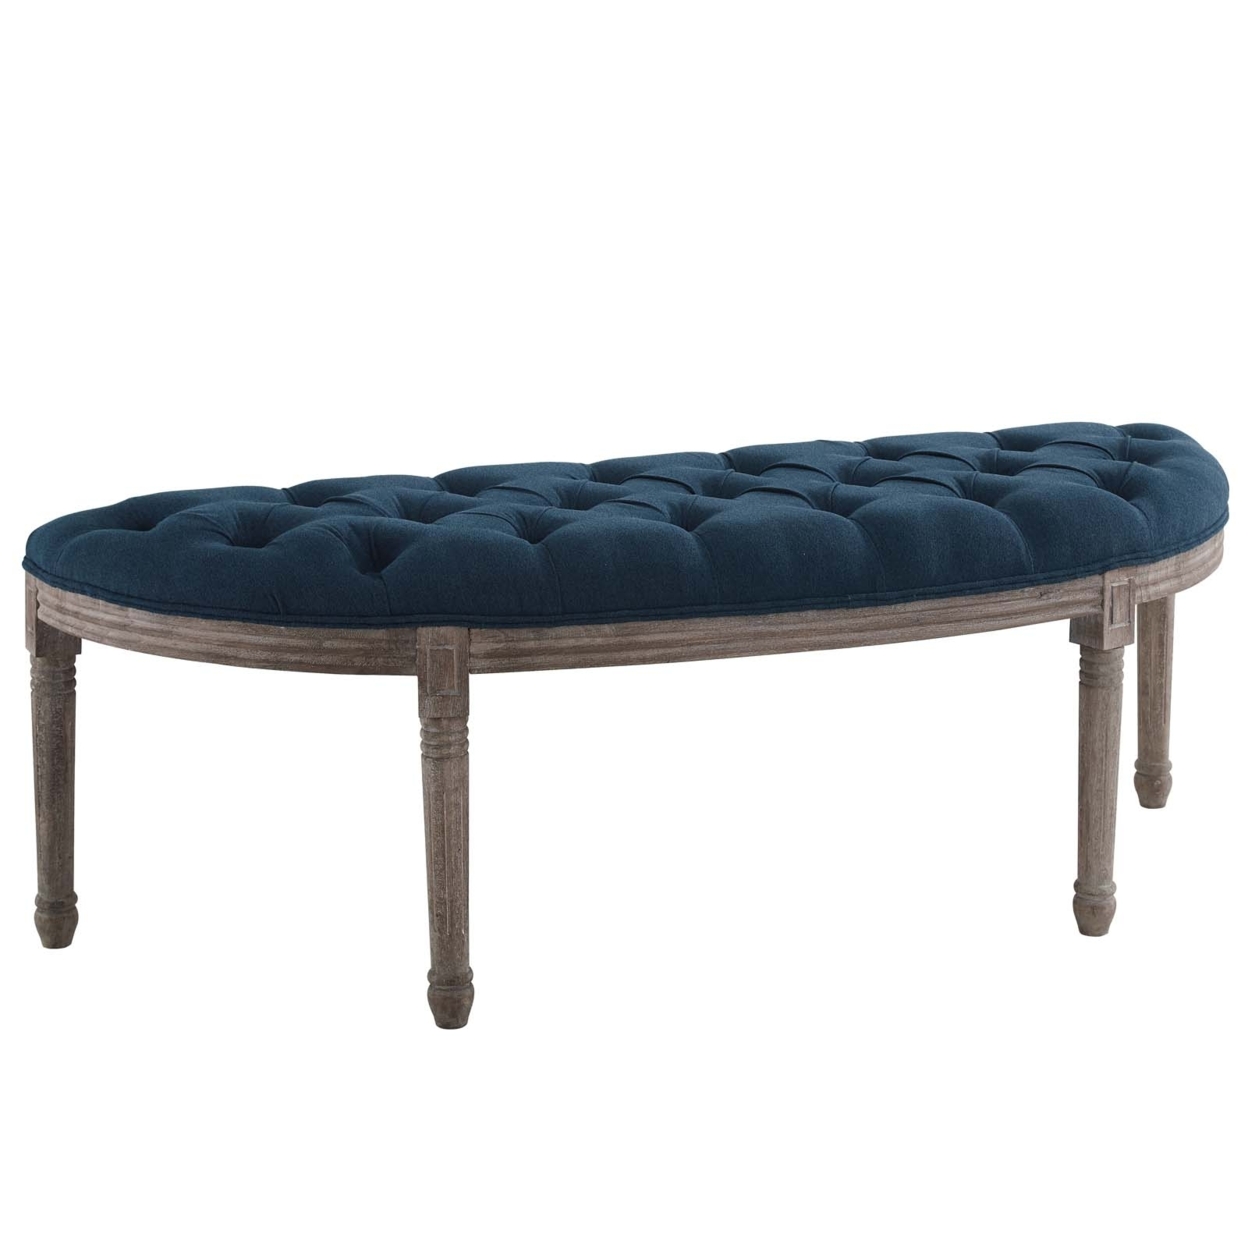 Esteem Vintage French Upholstered Fabric Semi-Circle Bench,Navy